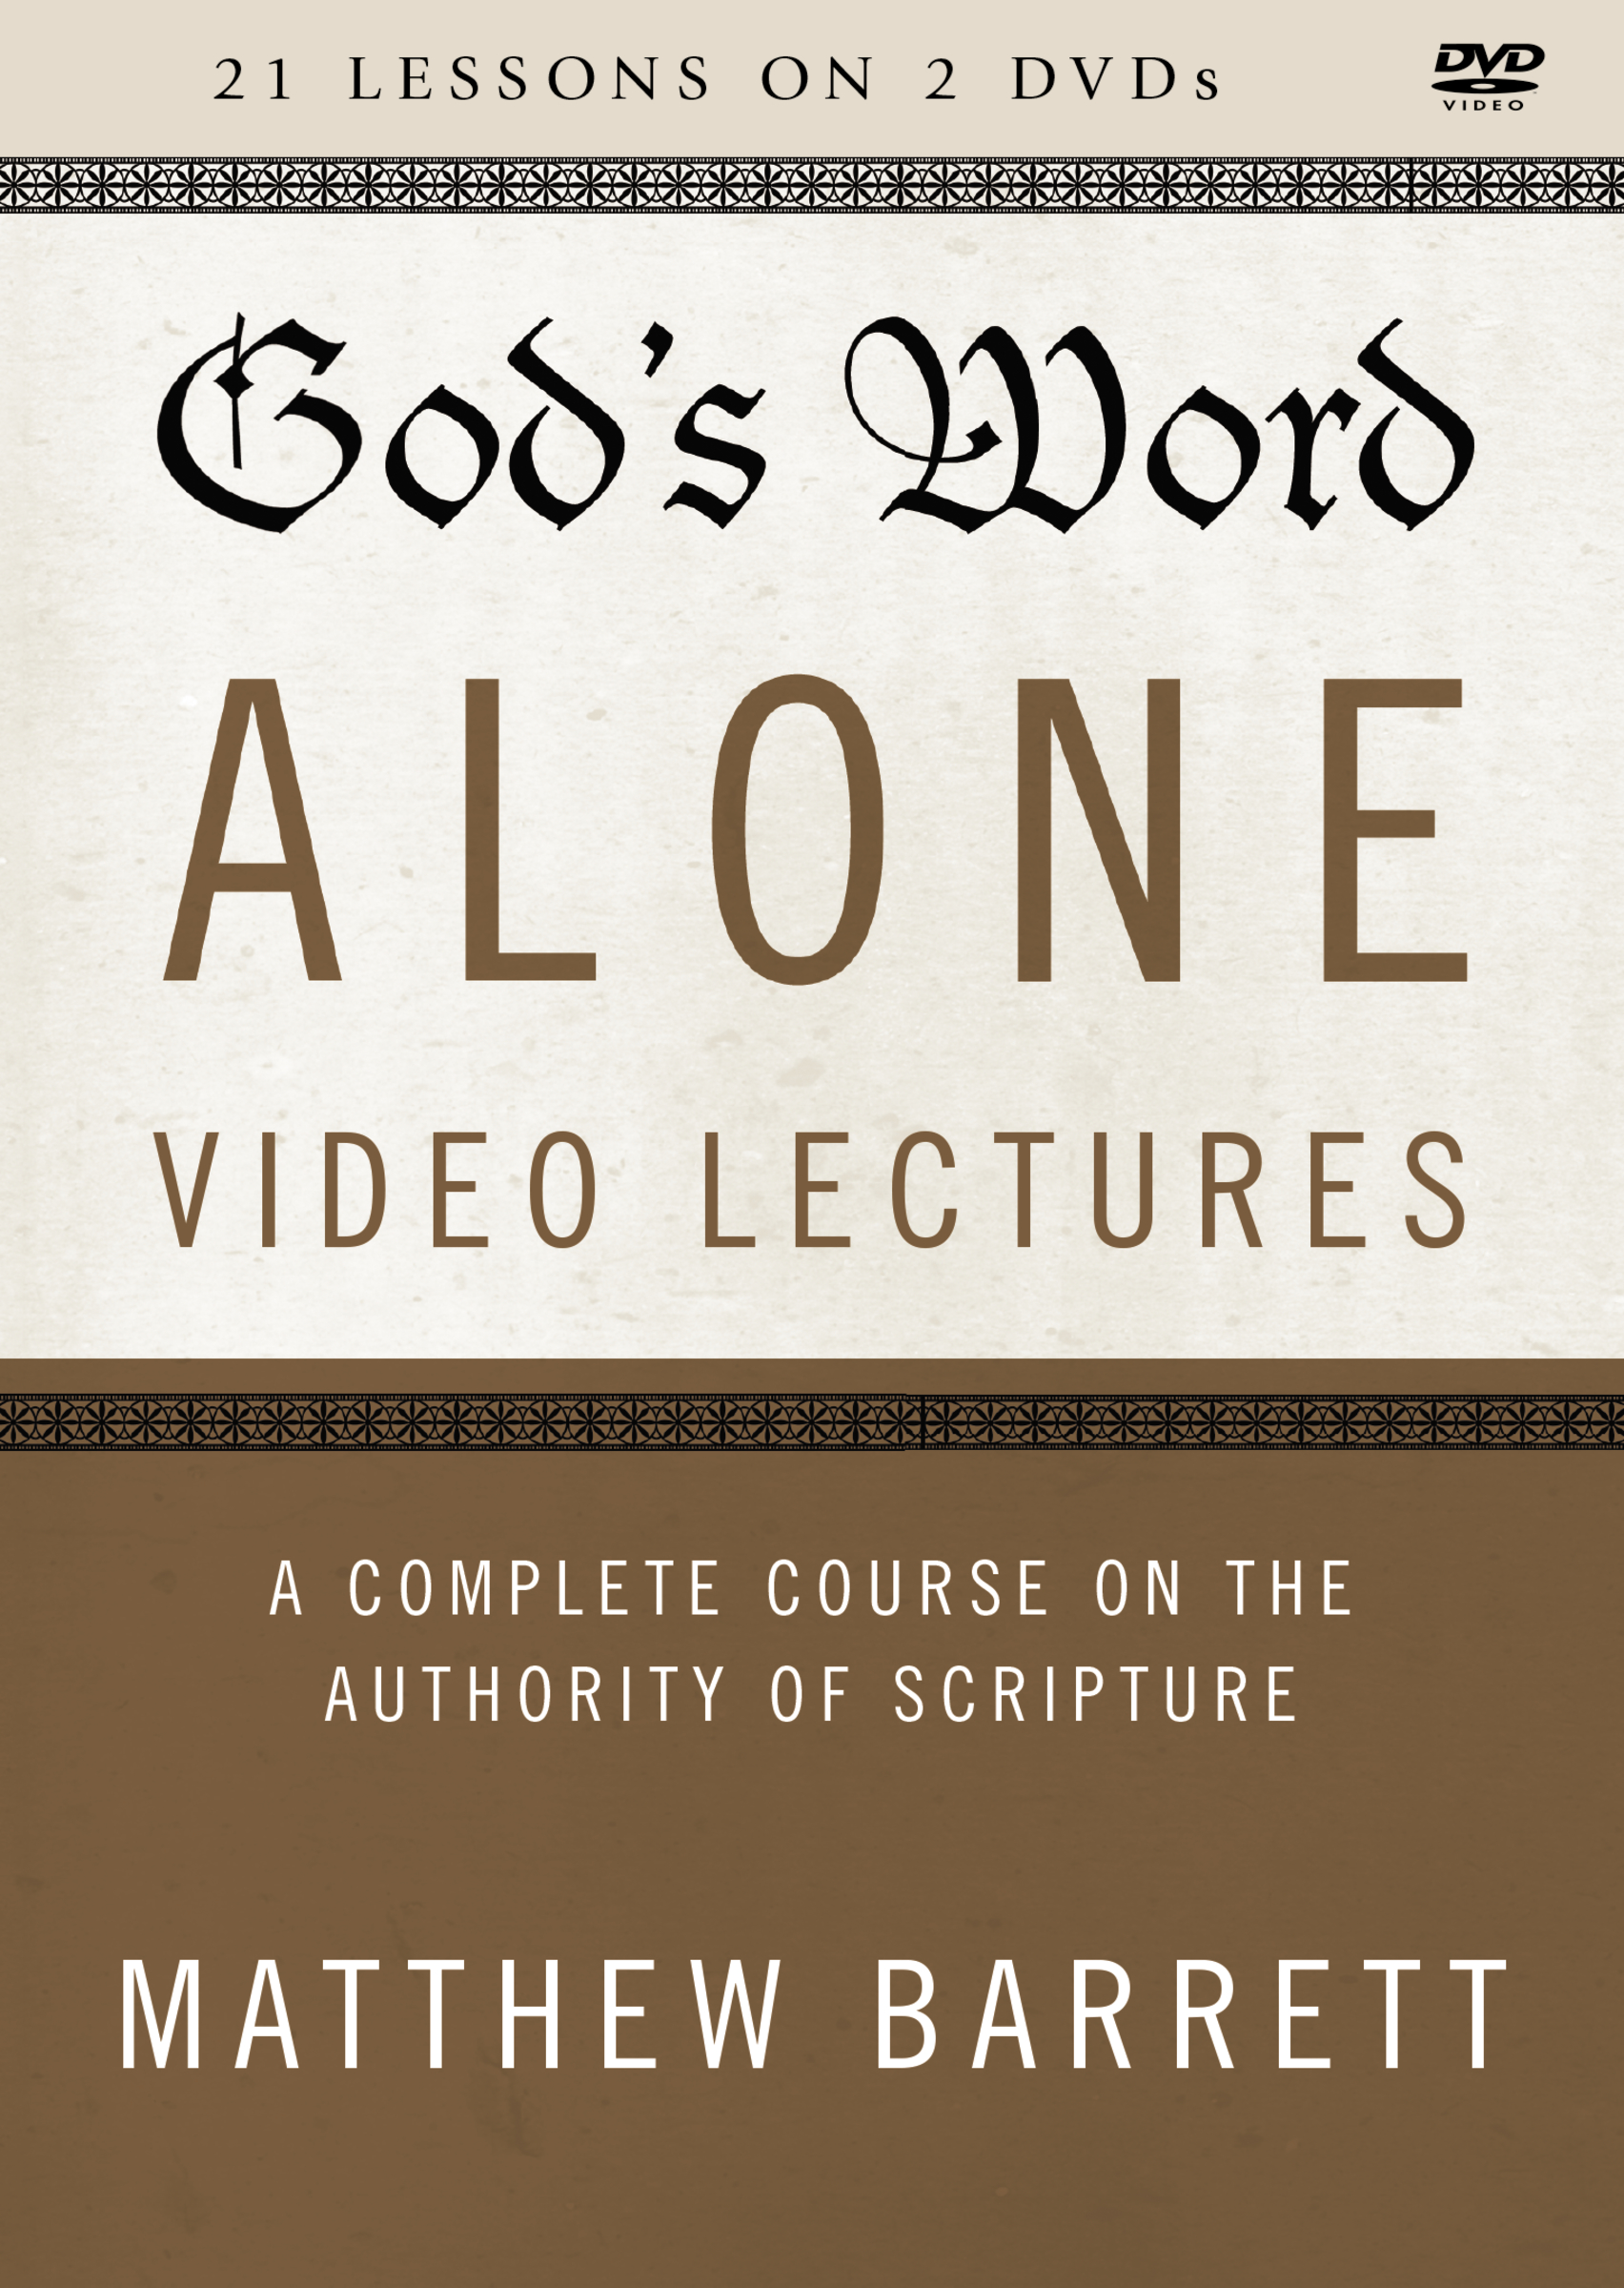 God's Word Alone Video Lectures